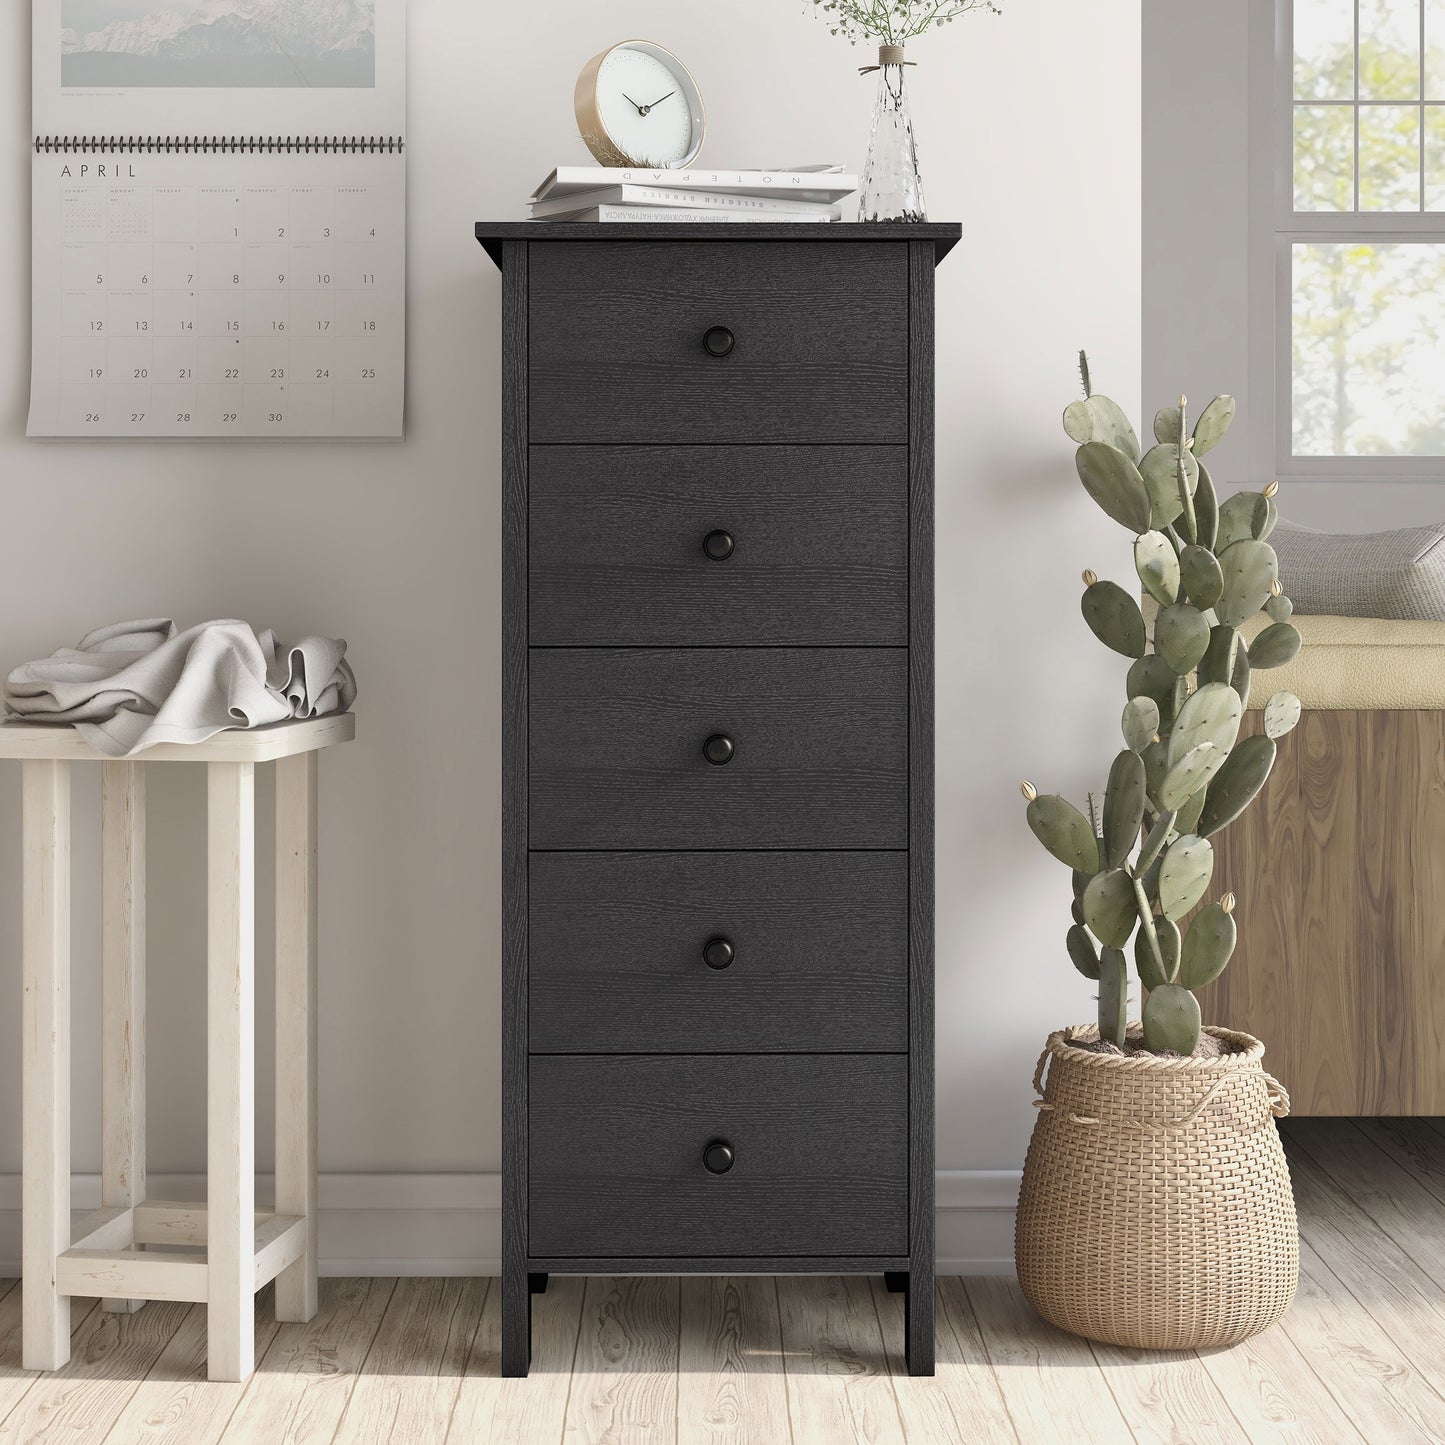 Front-facing transitional black slim five-drawer chest in a living area with accessories